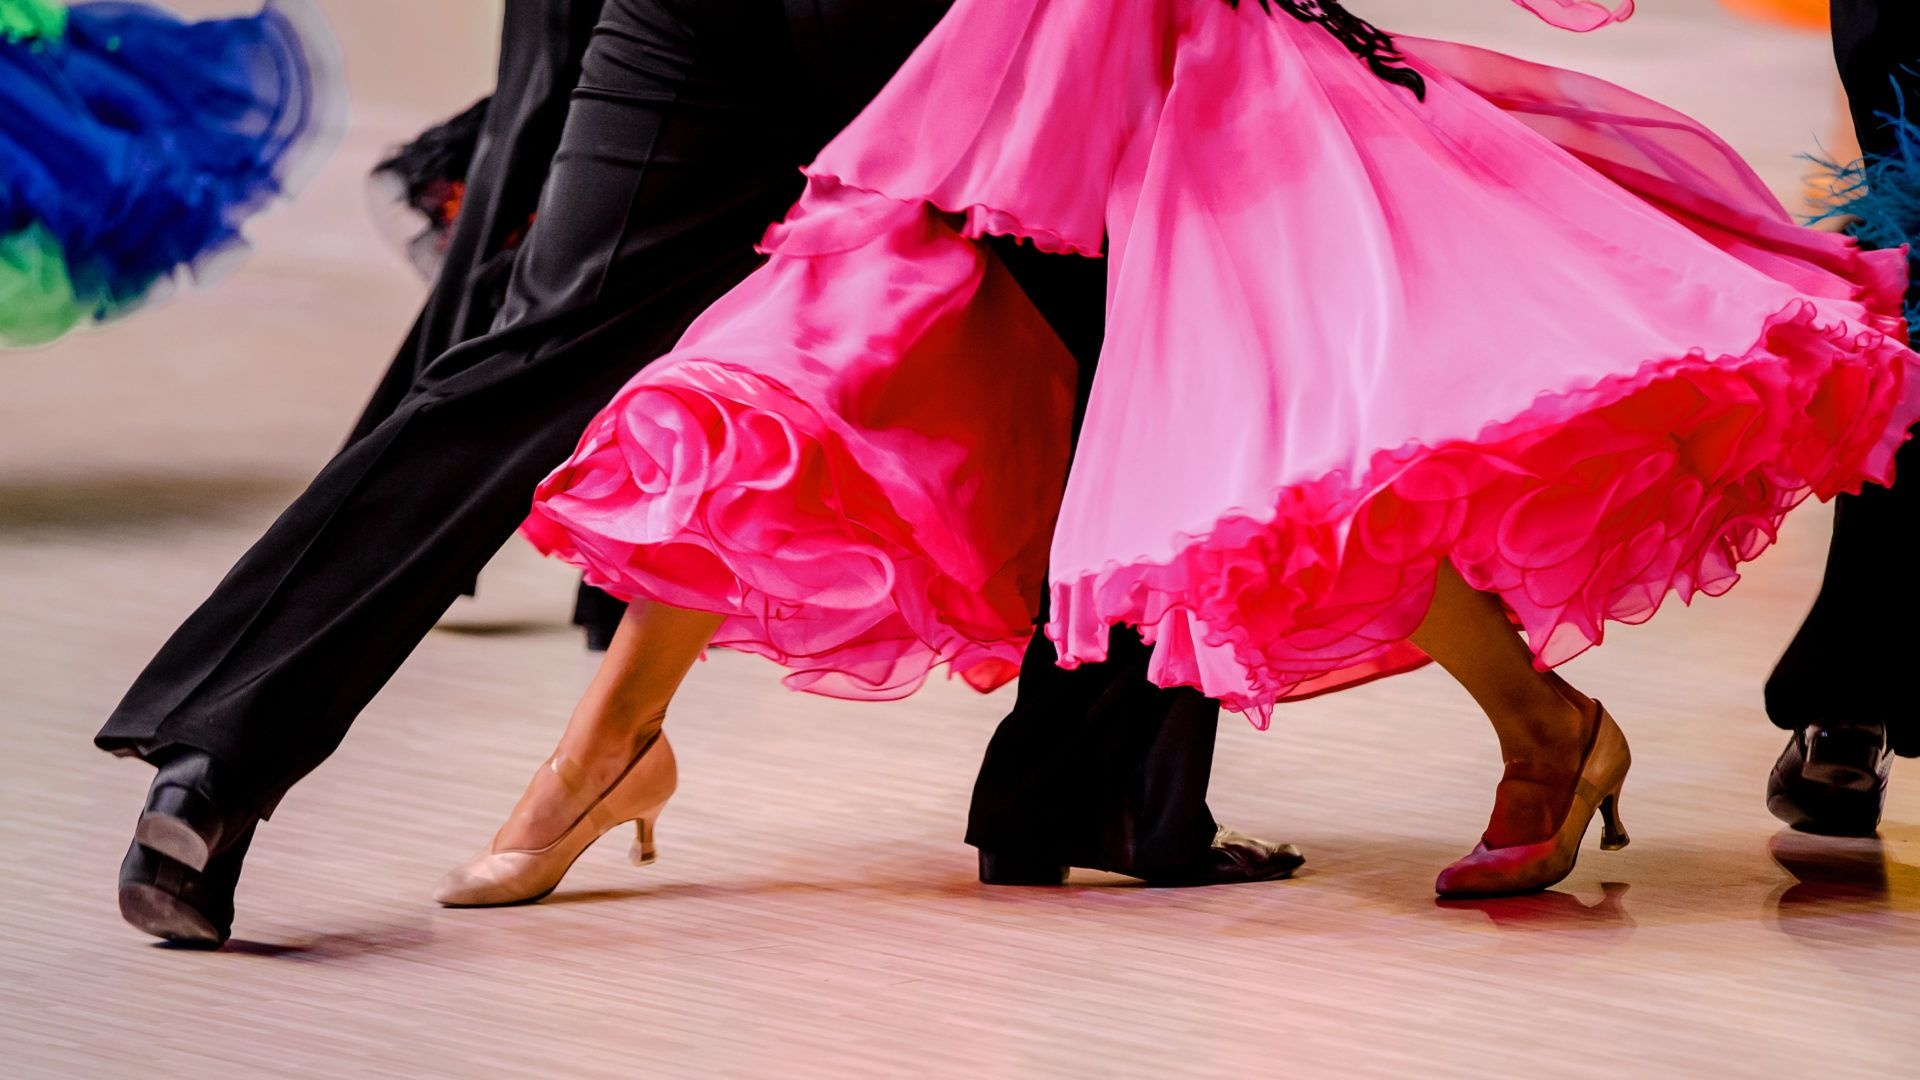 Pasodoble: Ballroom dancers, A theatrical Latin dance with Spanish and French origins. 1920x1080 Full HD Background.